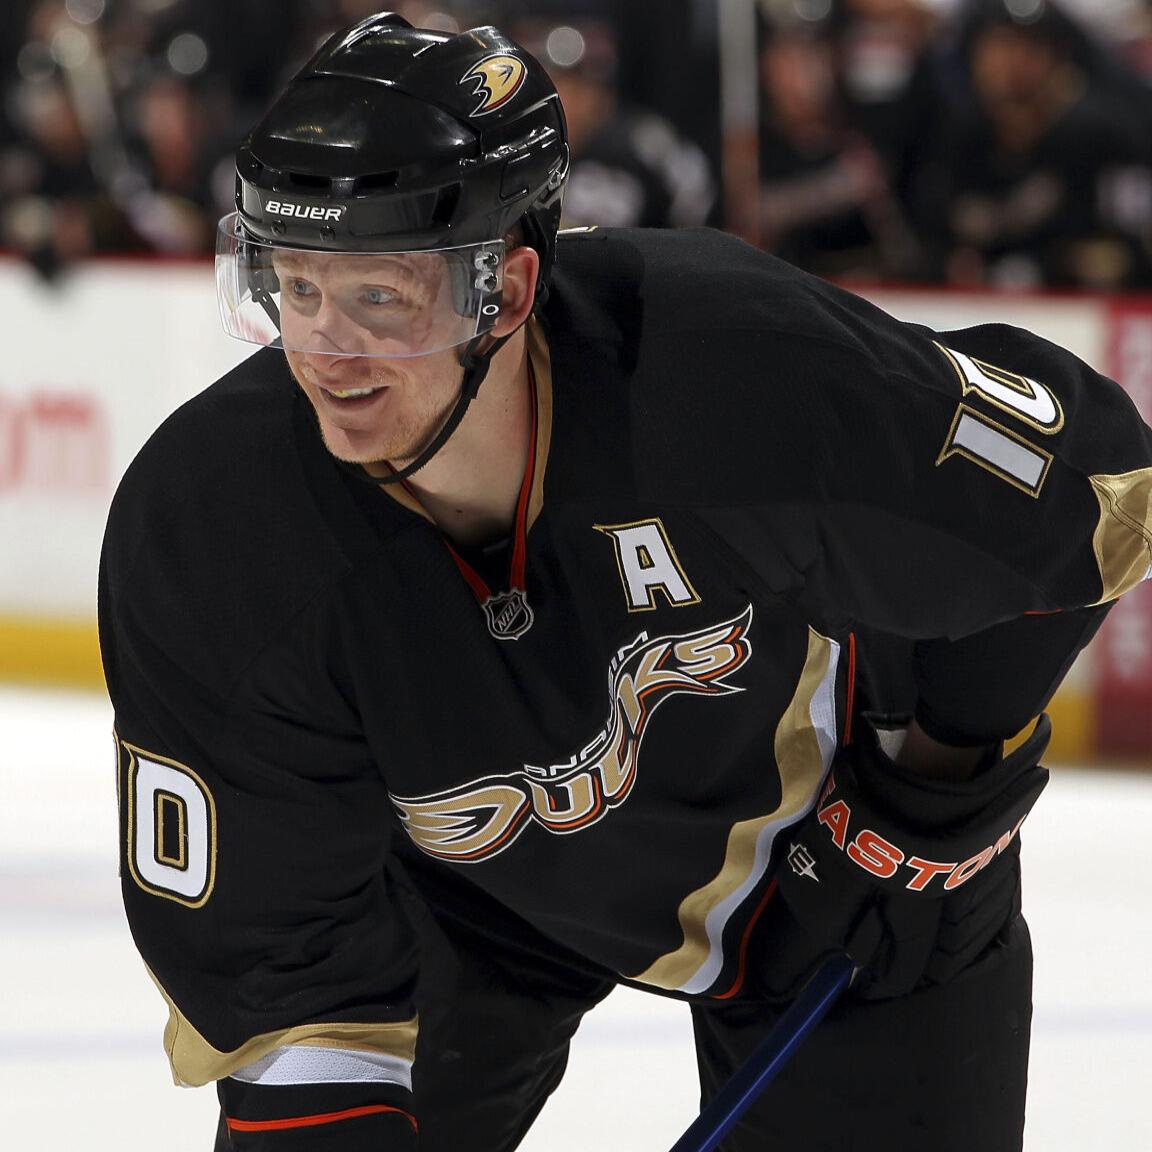 Why did Corey Perry re-sign with Anaheim Ducks, rather than test